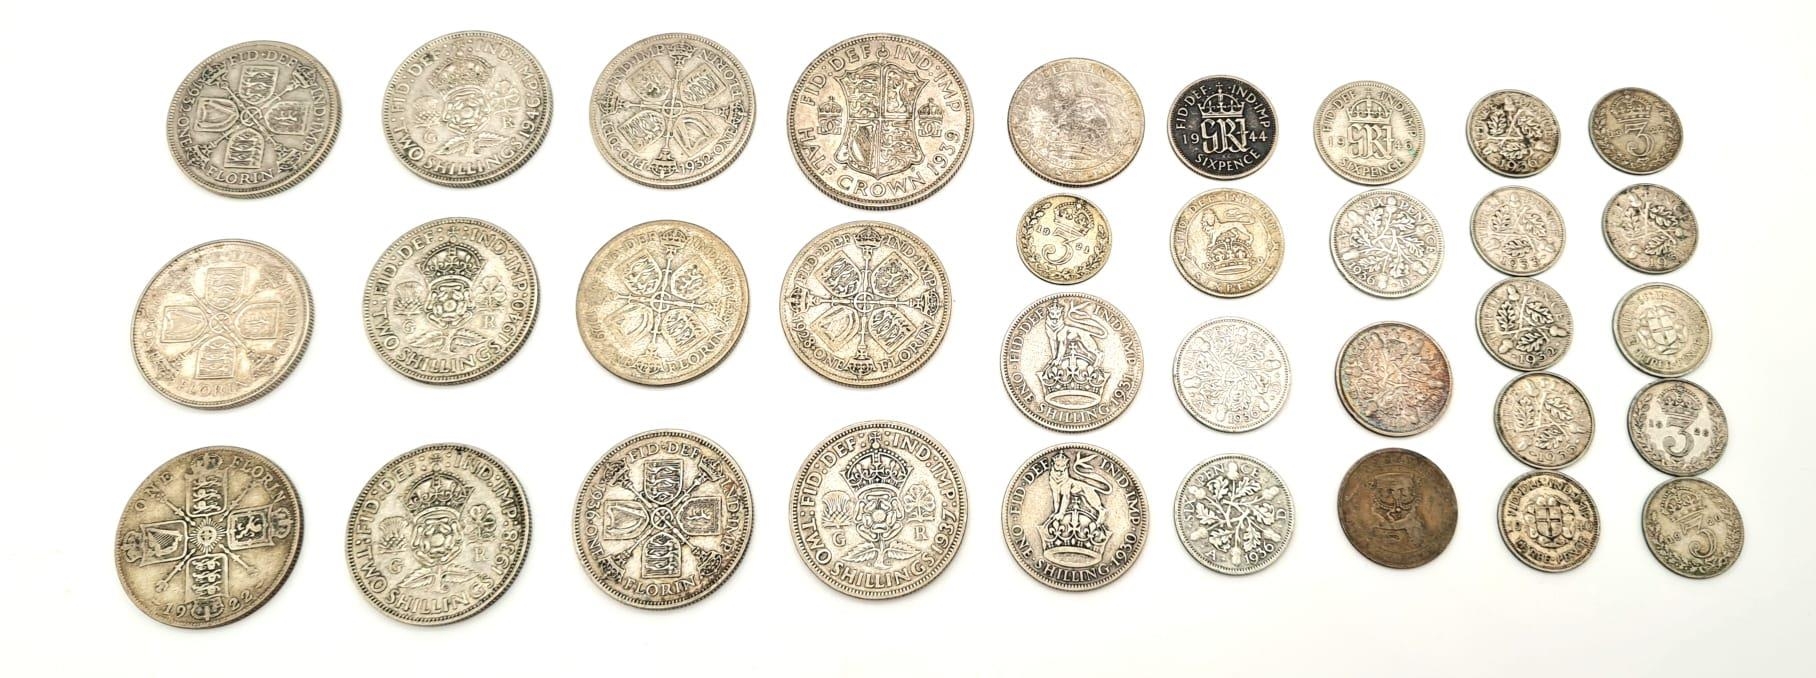 A Selection of Vintage Silver (.500) English Coins. Please see photos for conditions. 185g total - Image 3 of 8